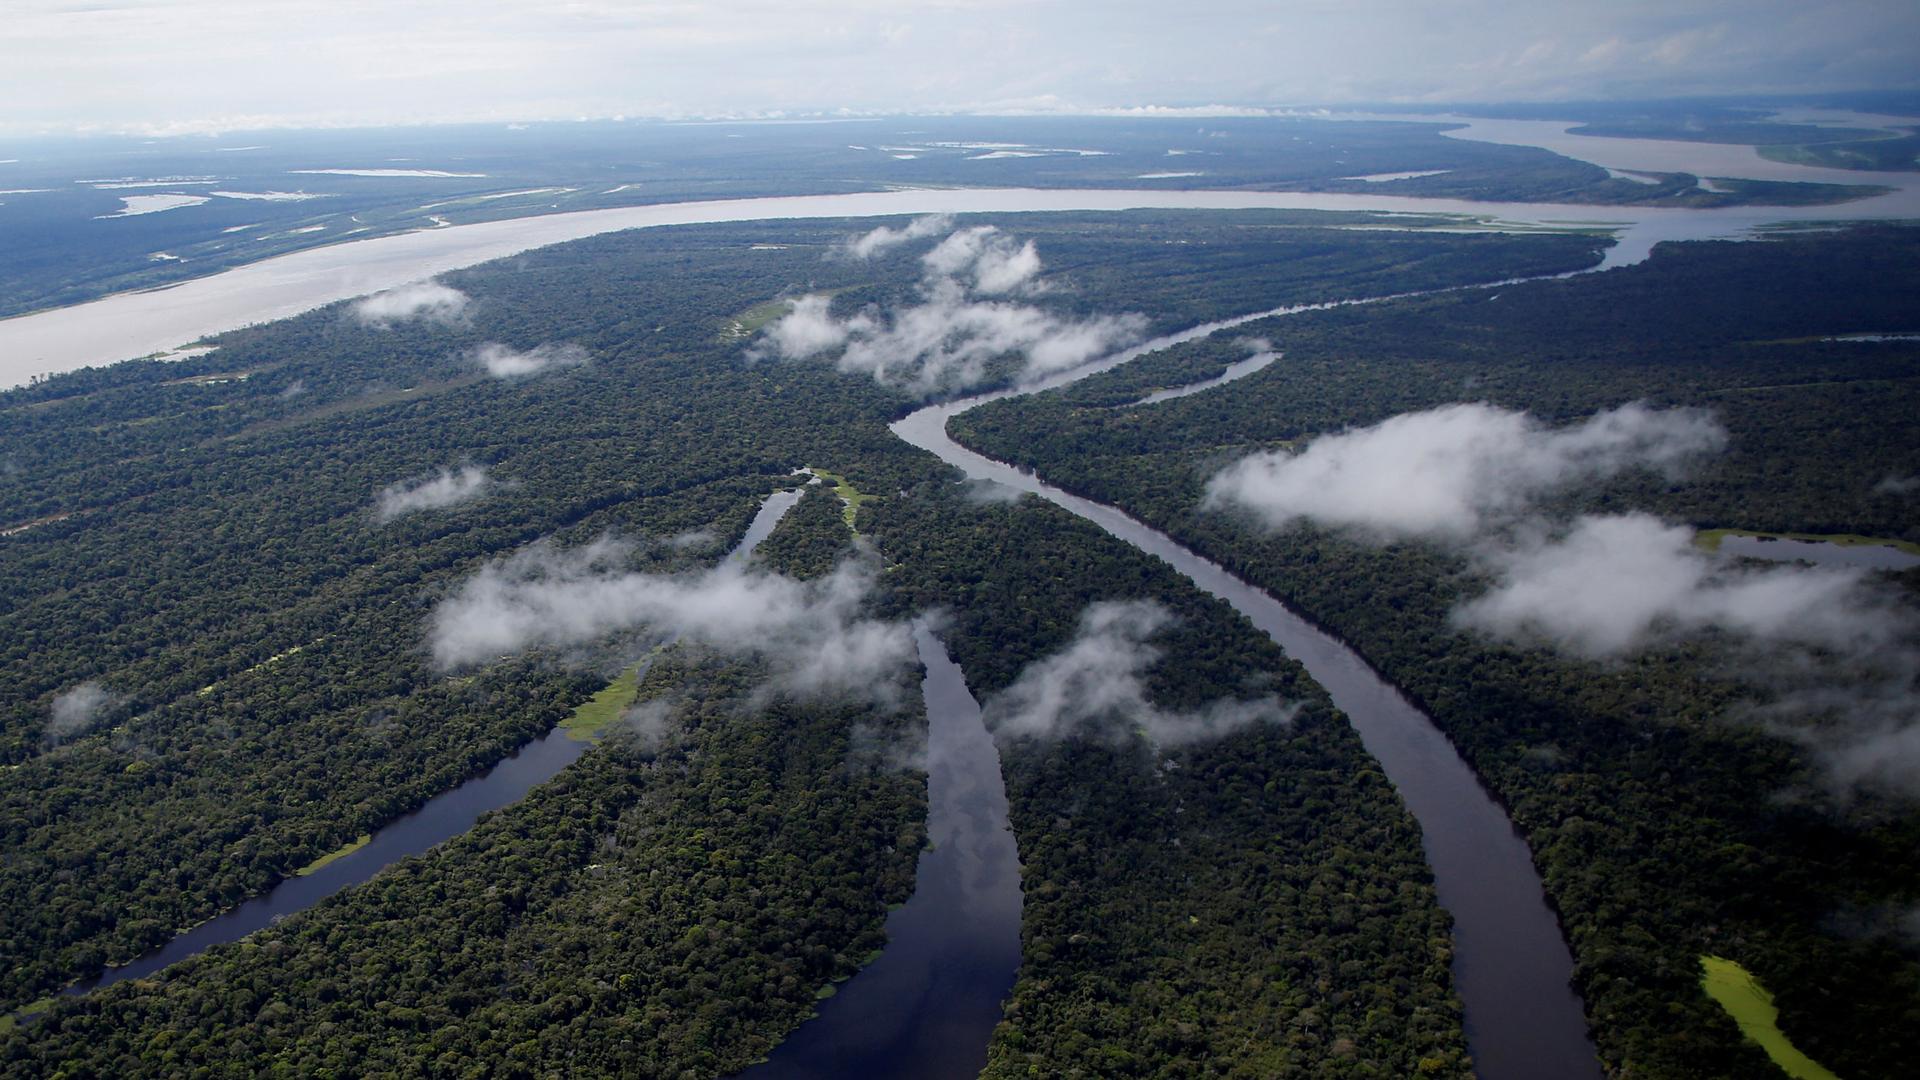 The Mamiraua Sustainable Development Reserve is shown from above where four bodies of water connect together weaving in-between trees.